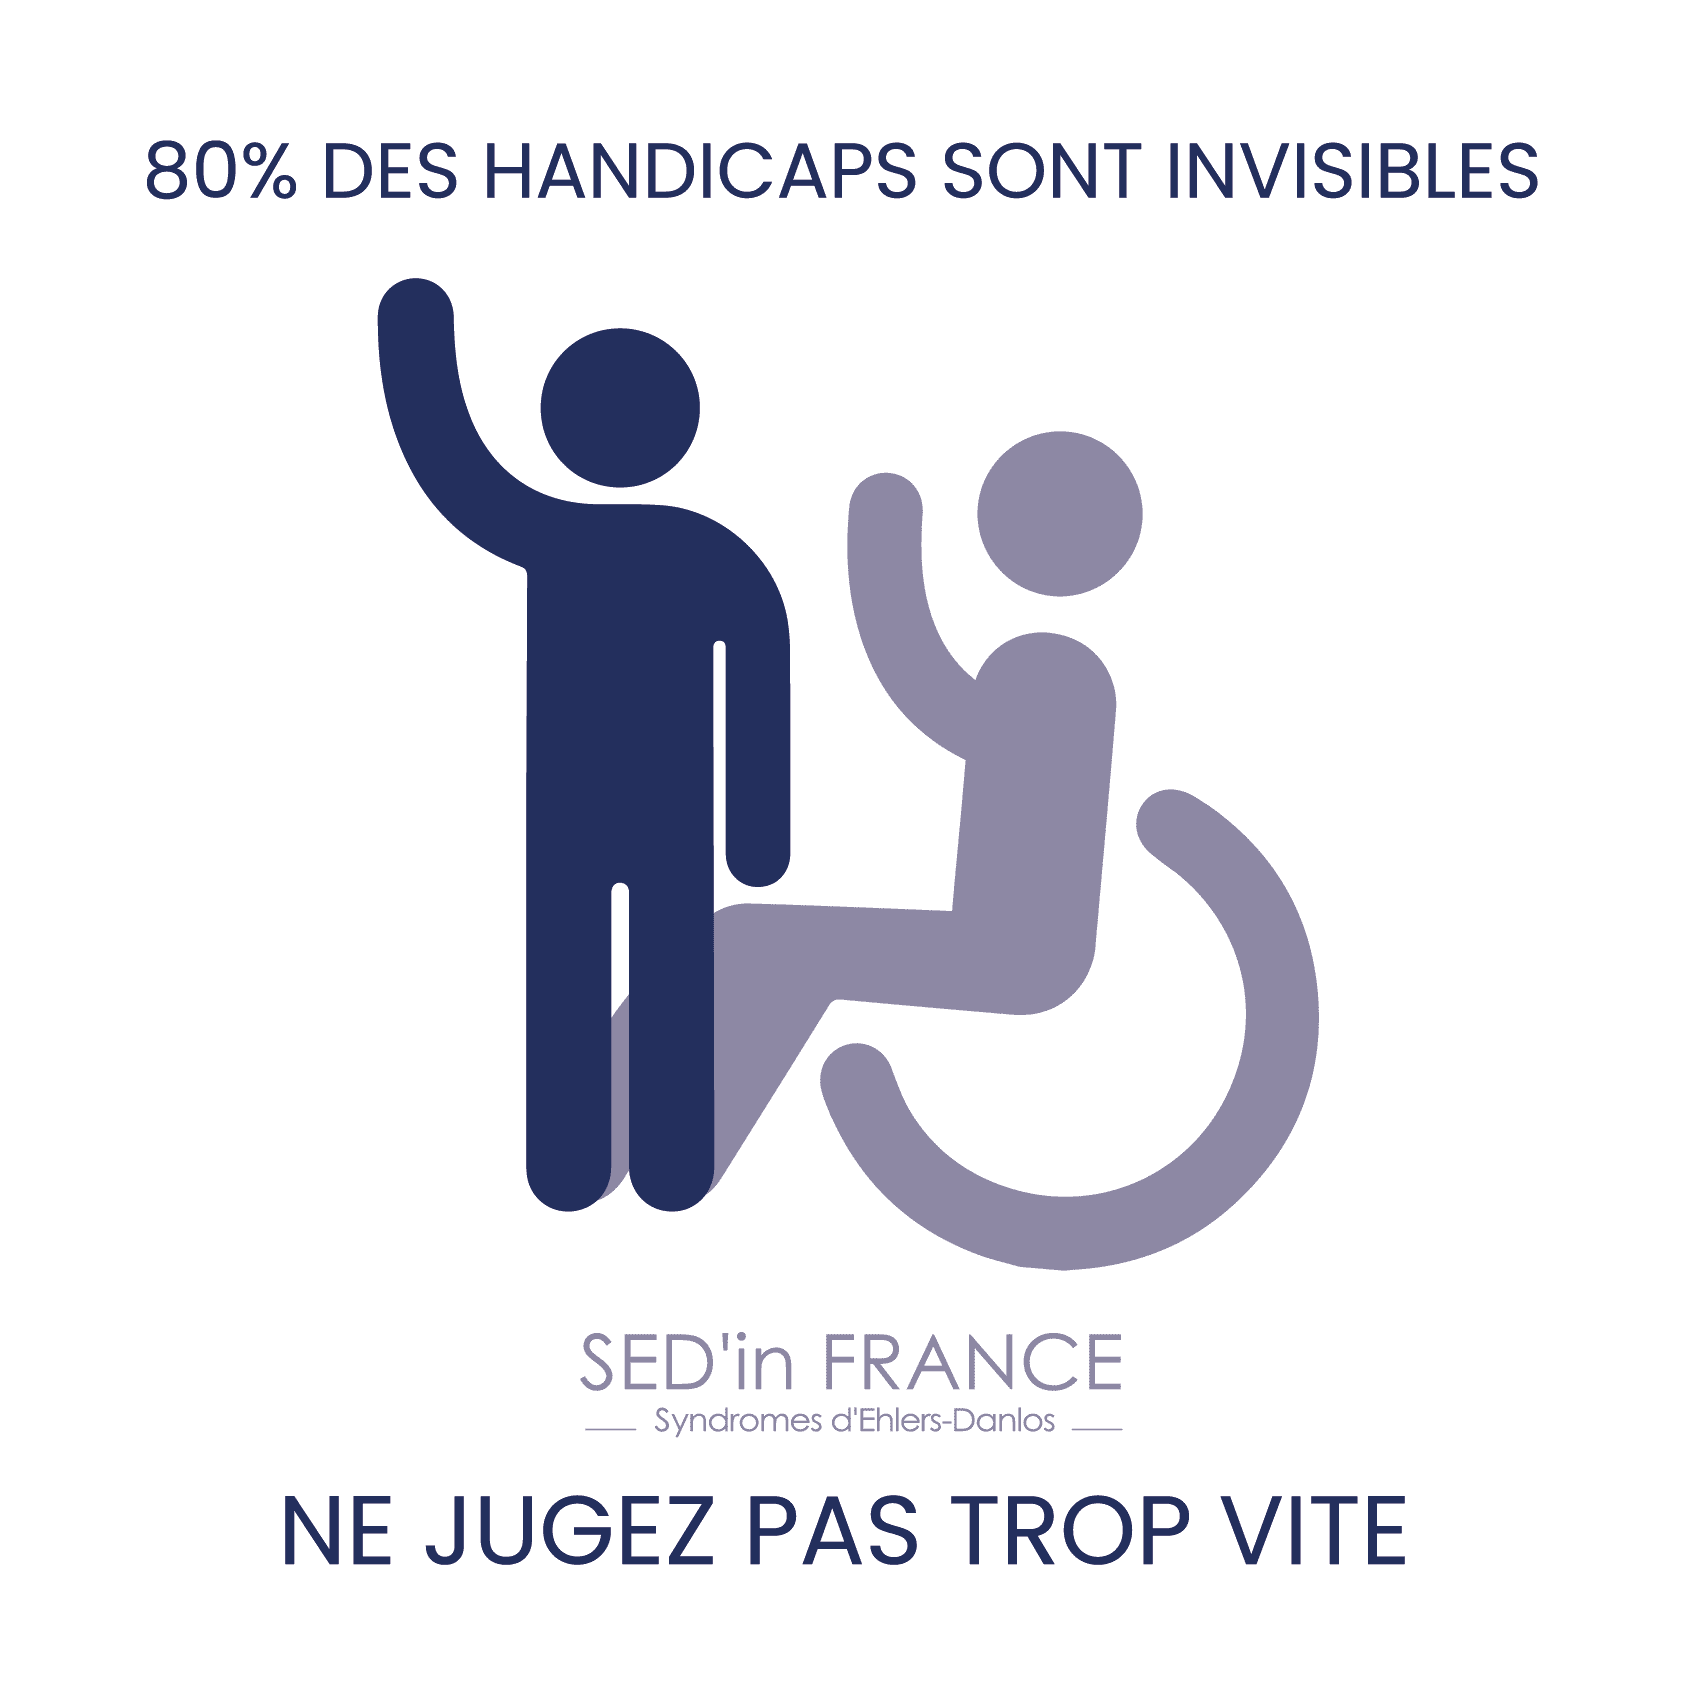 Autocollants Handicap Invisible - SED in FRANCE